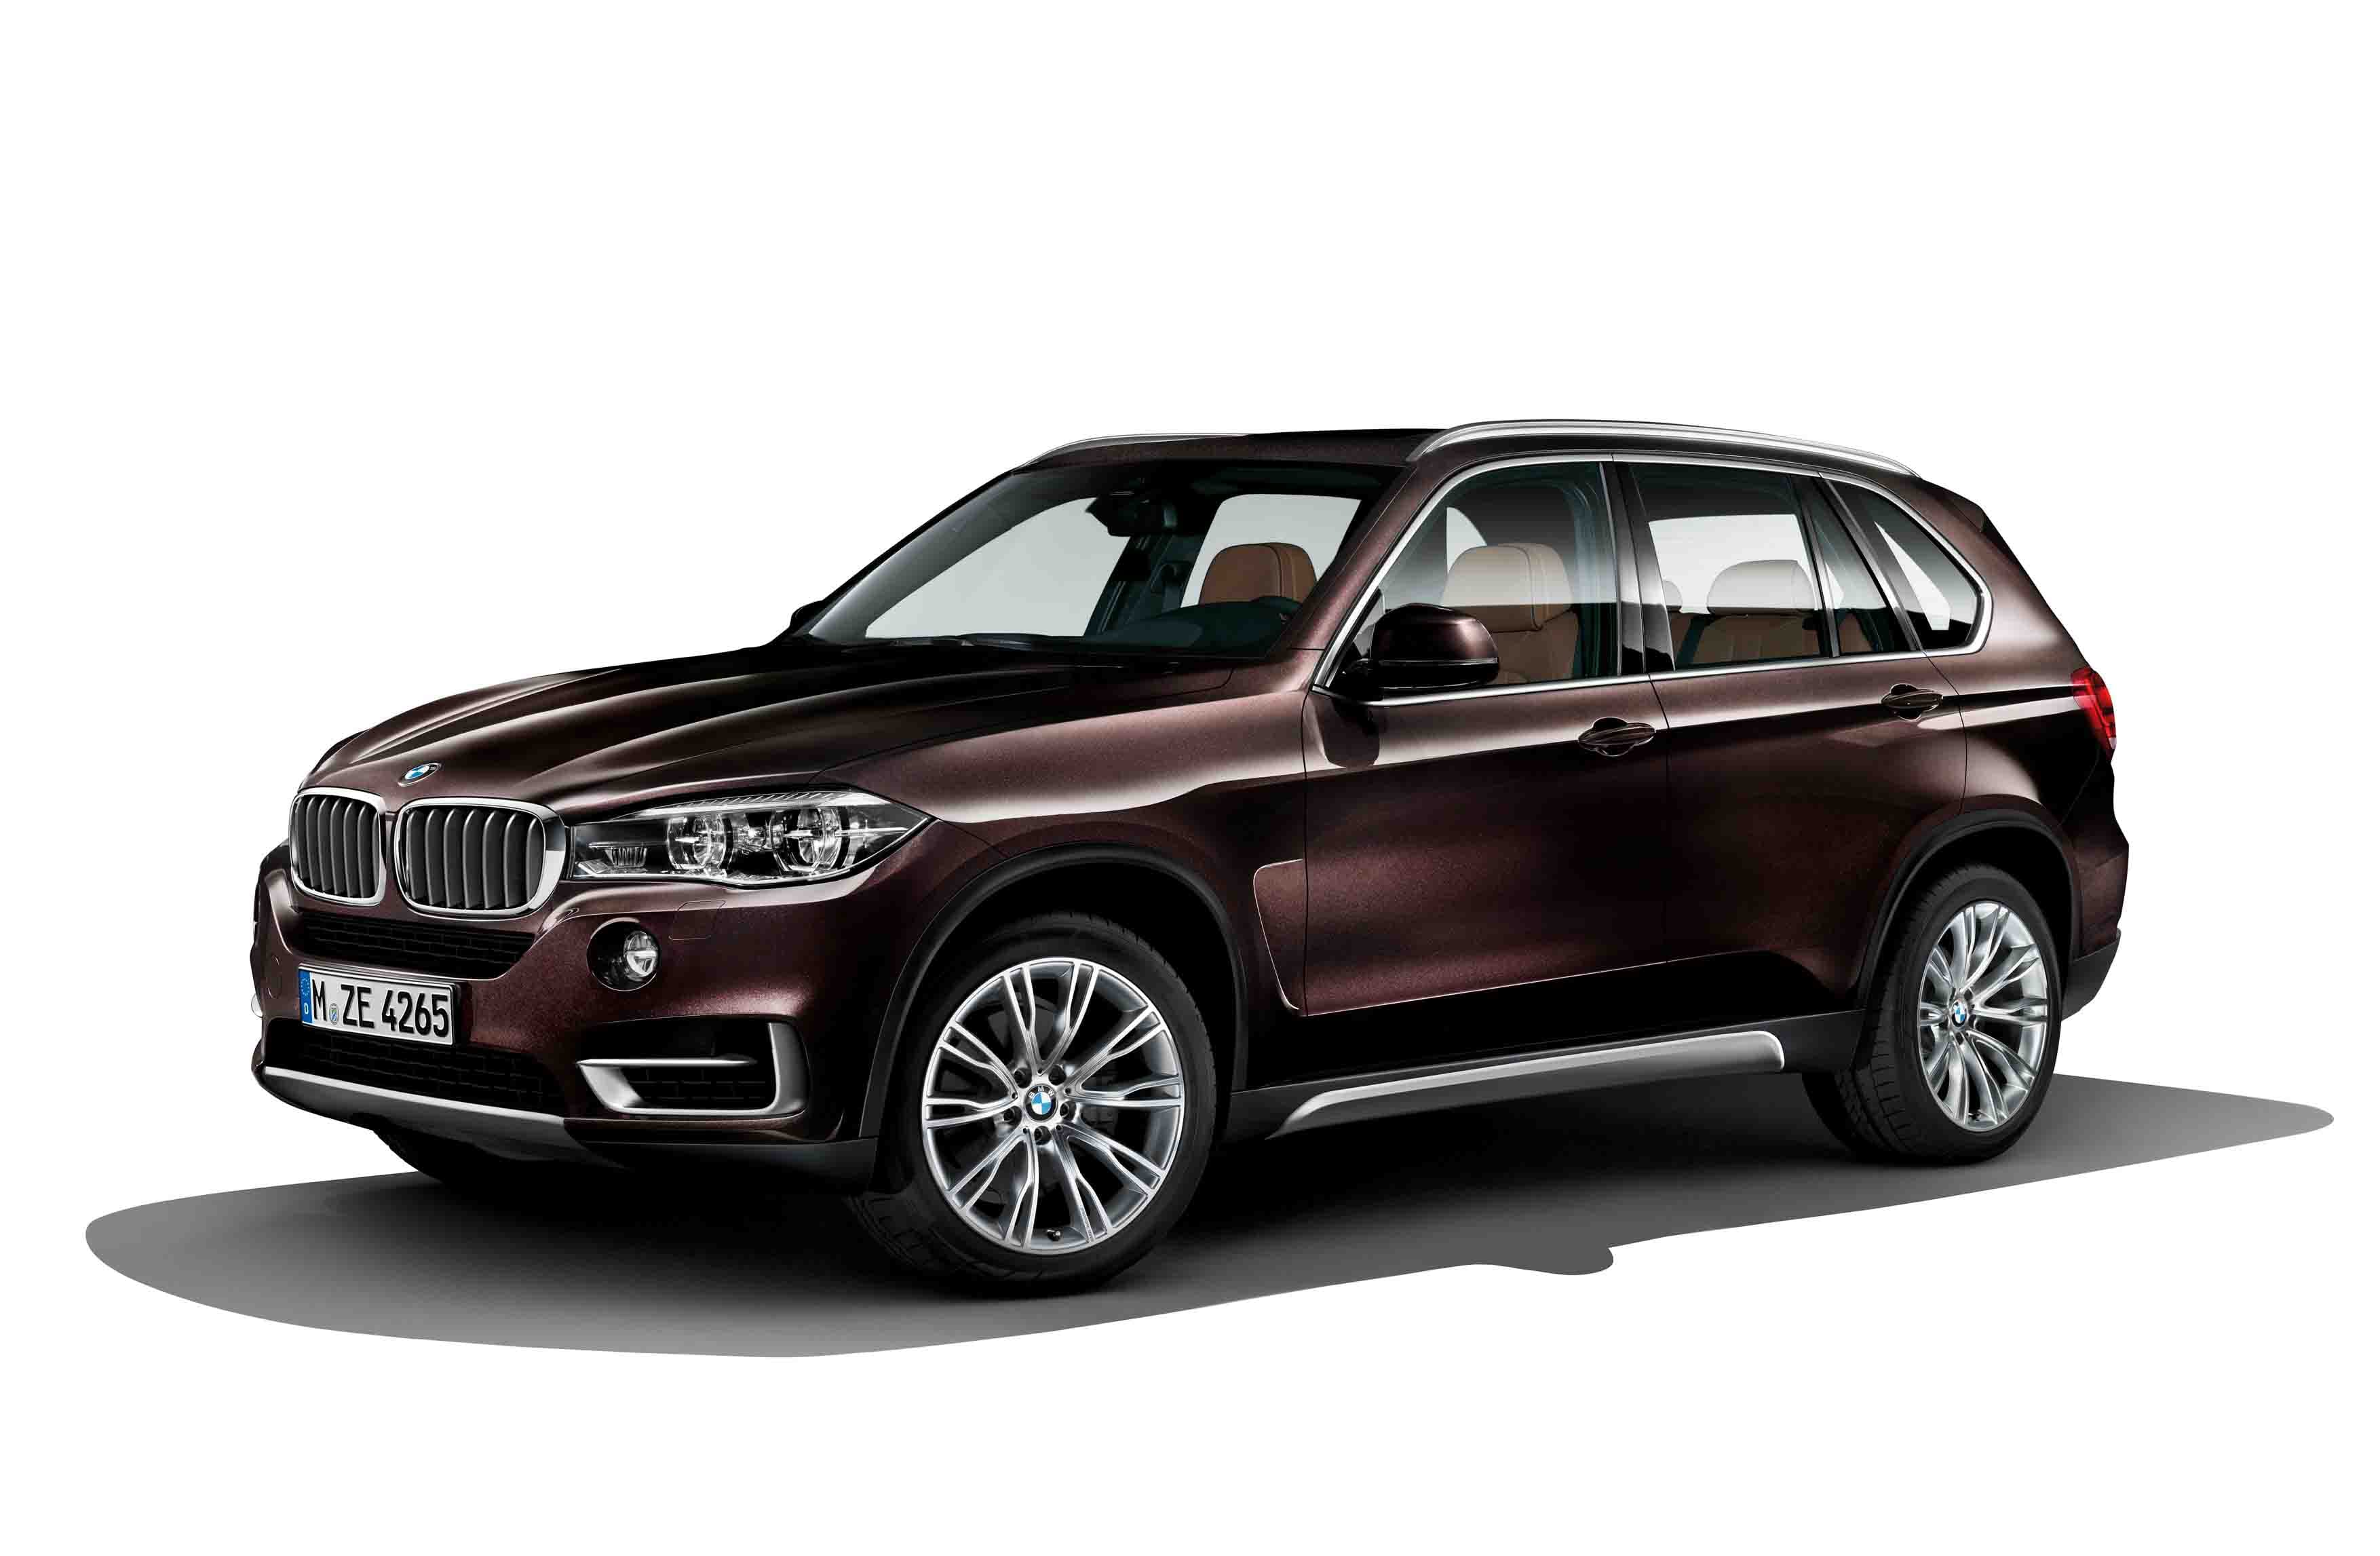 BMW X5 Price in India, Review, Images  BMW Cars